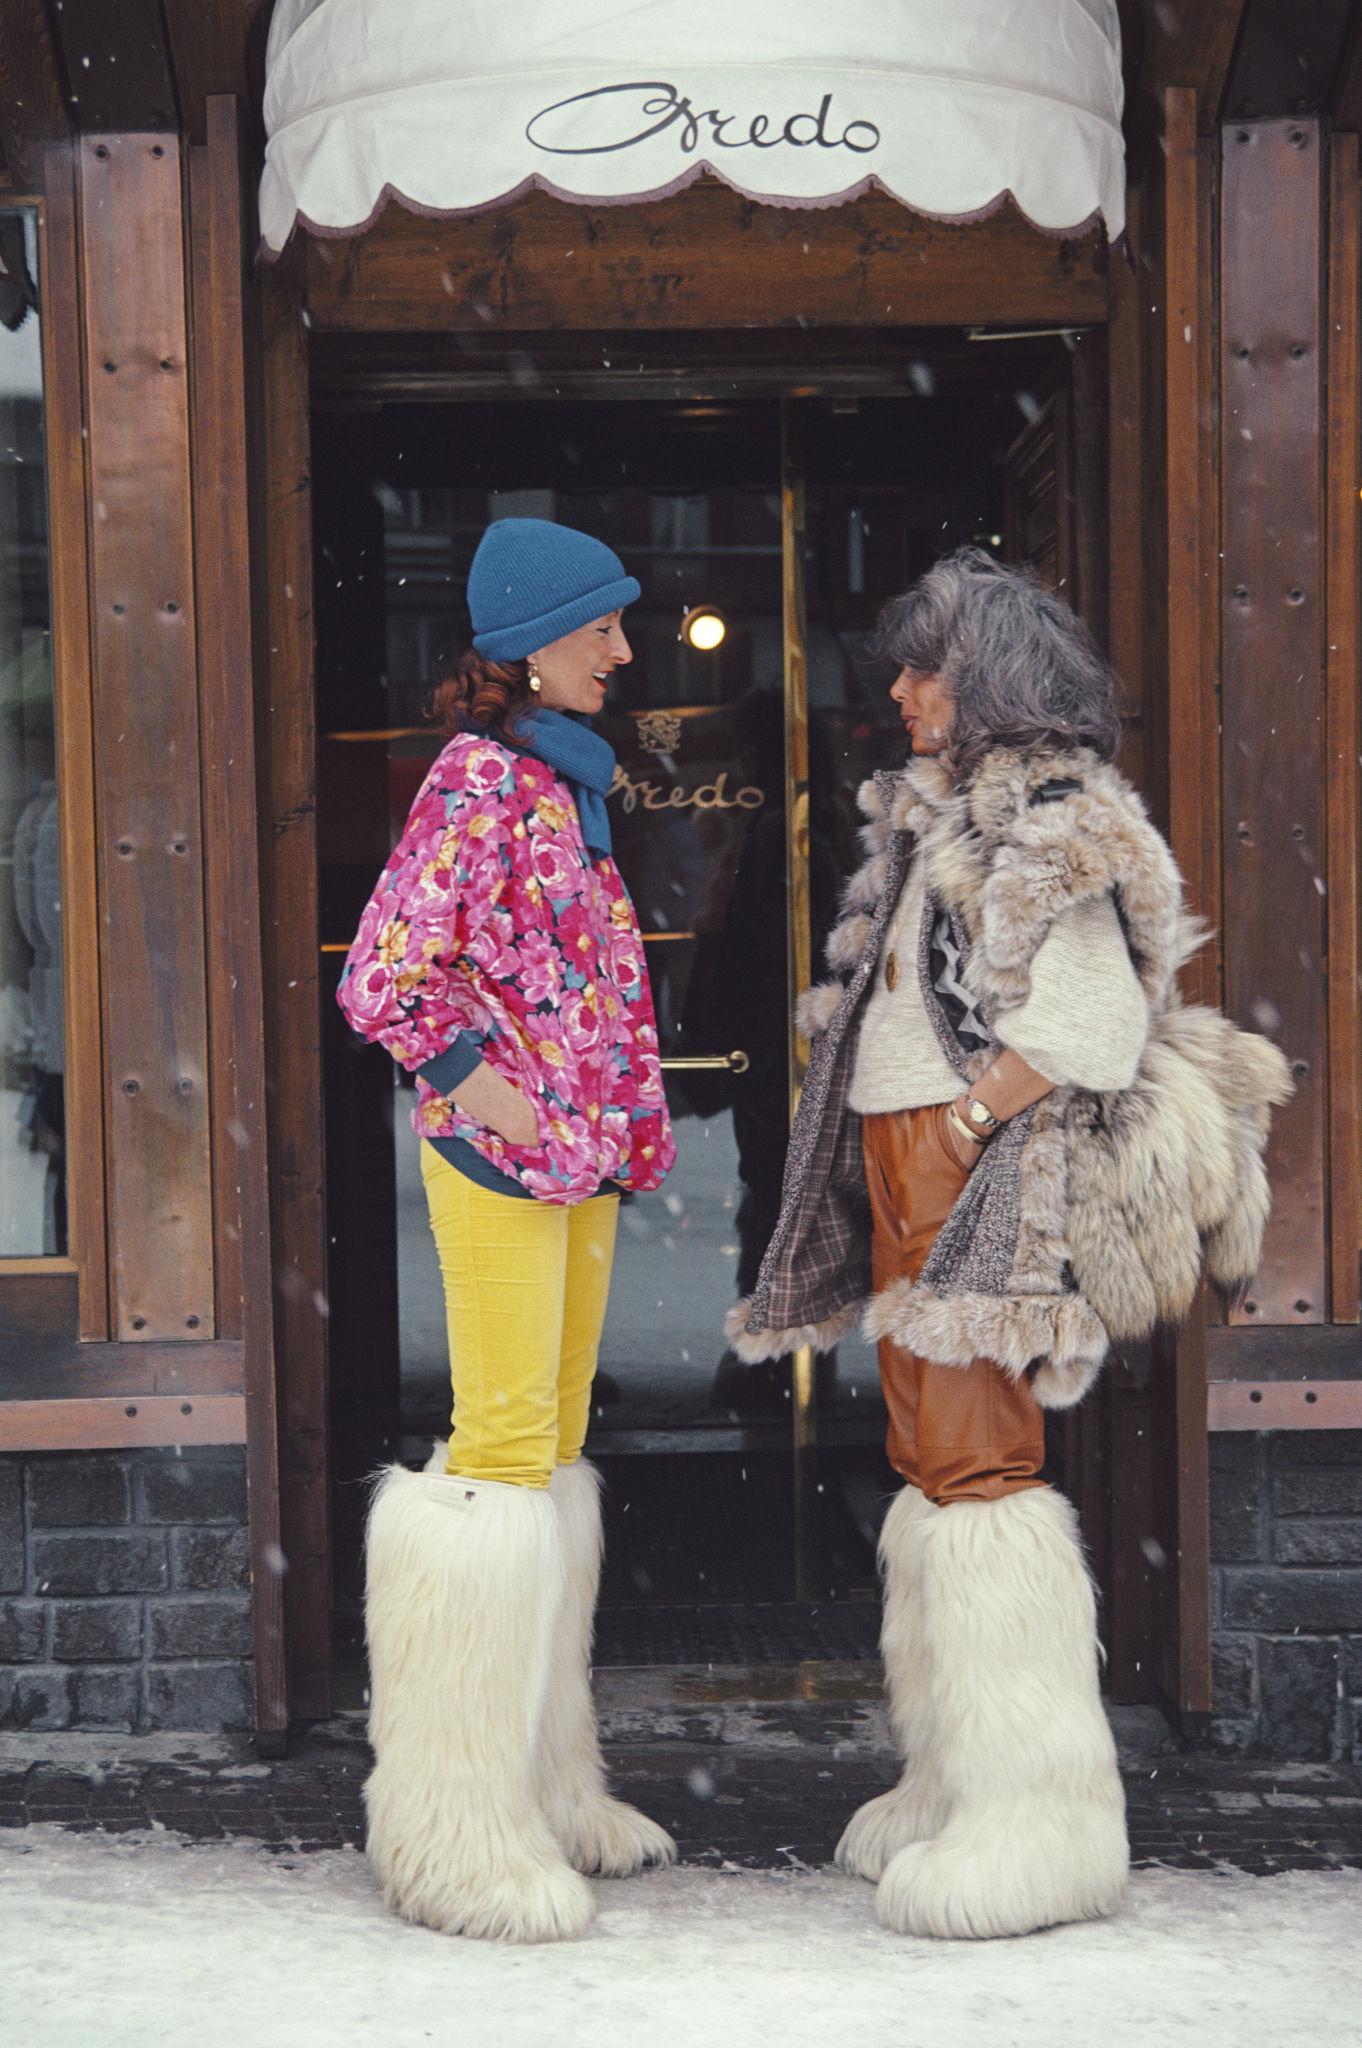 Cortina d'Ampezzo Fashion
1972
c print
Estate stamped and hand numbered edition of 150 with certificate of authenticity from the estate. 

Isa Genolini and Maria Antonia in the main street of Cortina d'Ampezzo, Italy, March 1982. 

Slim Aarons